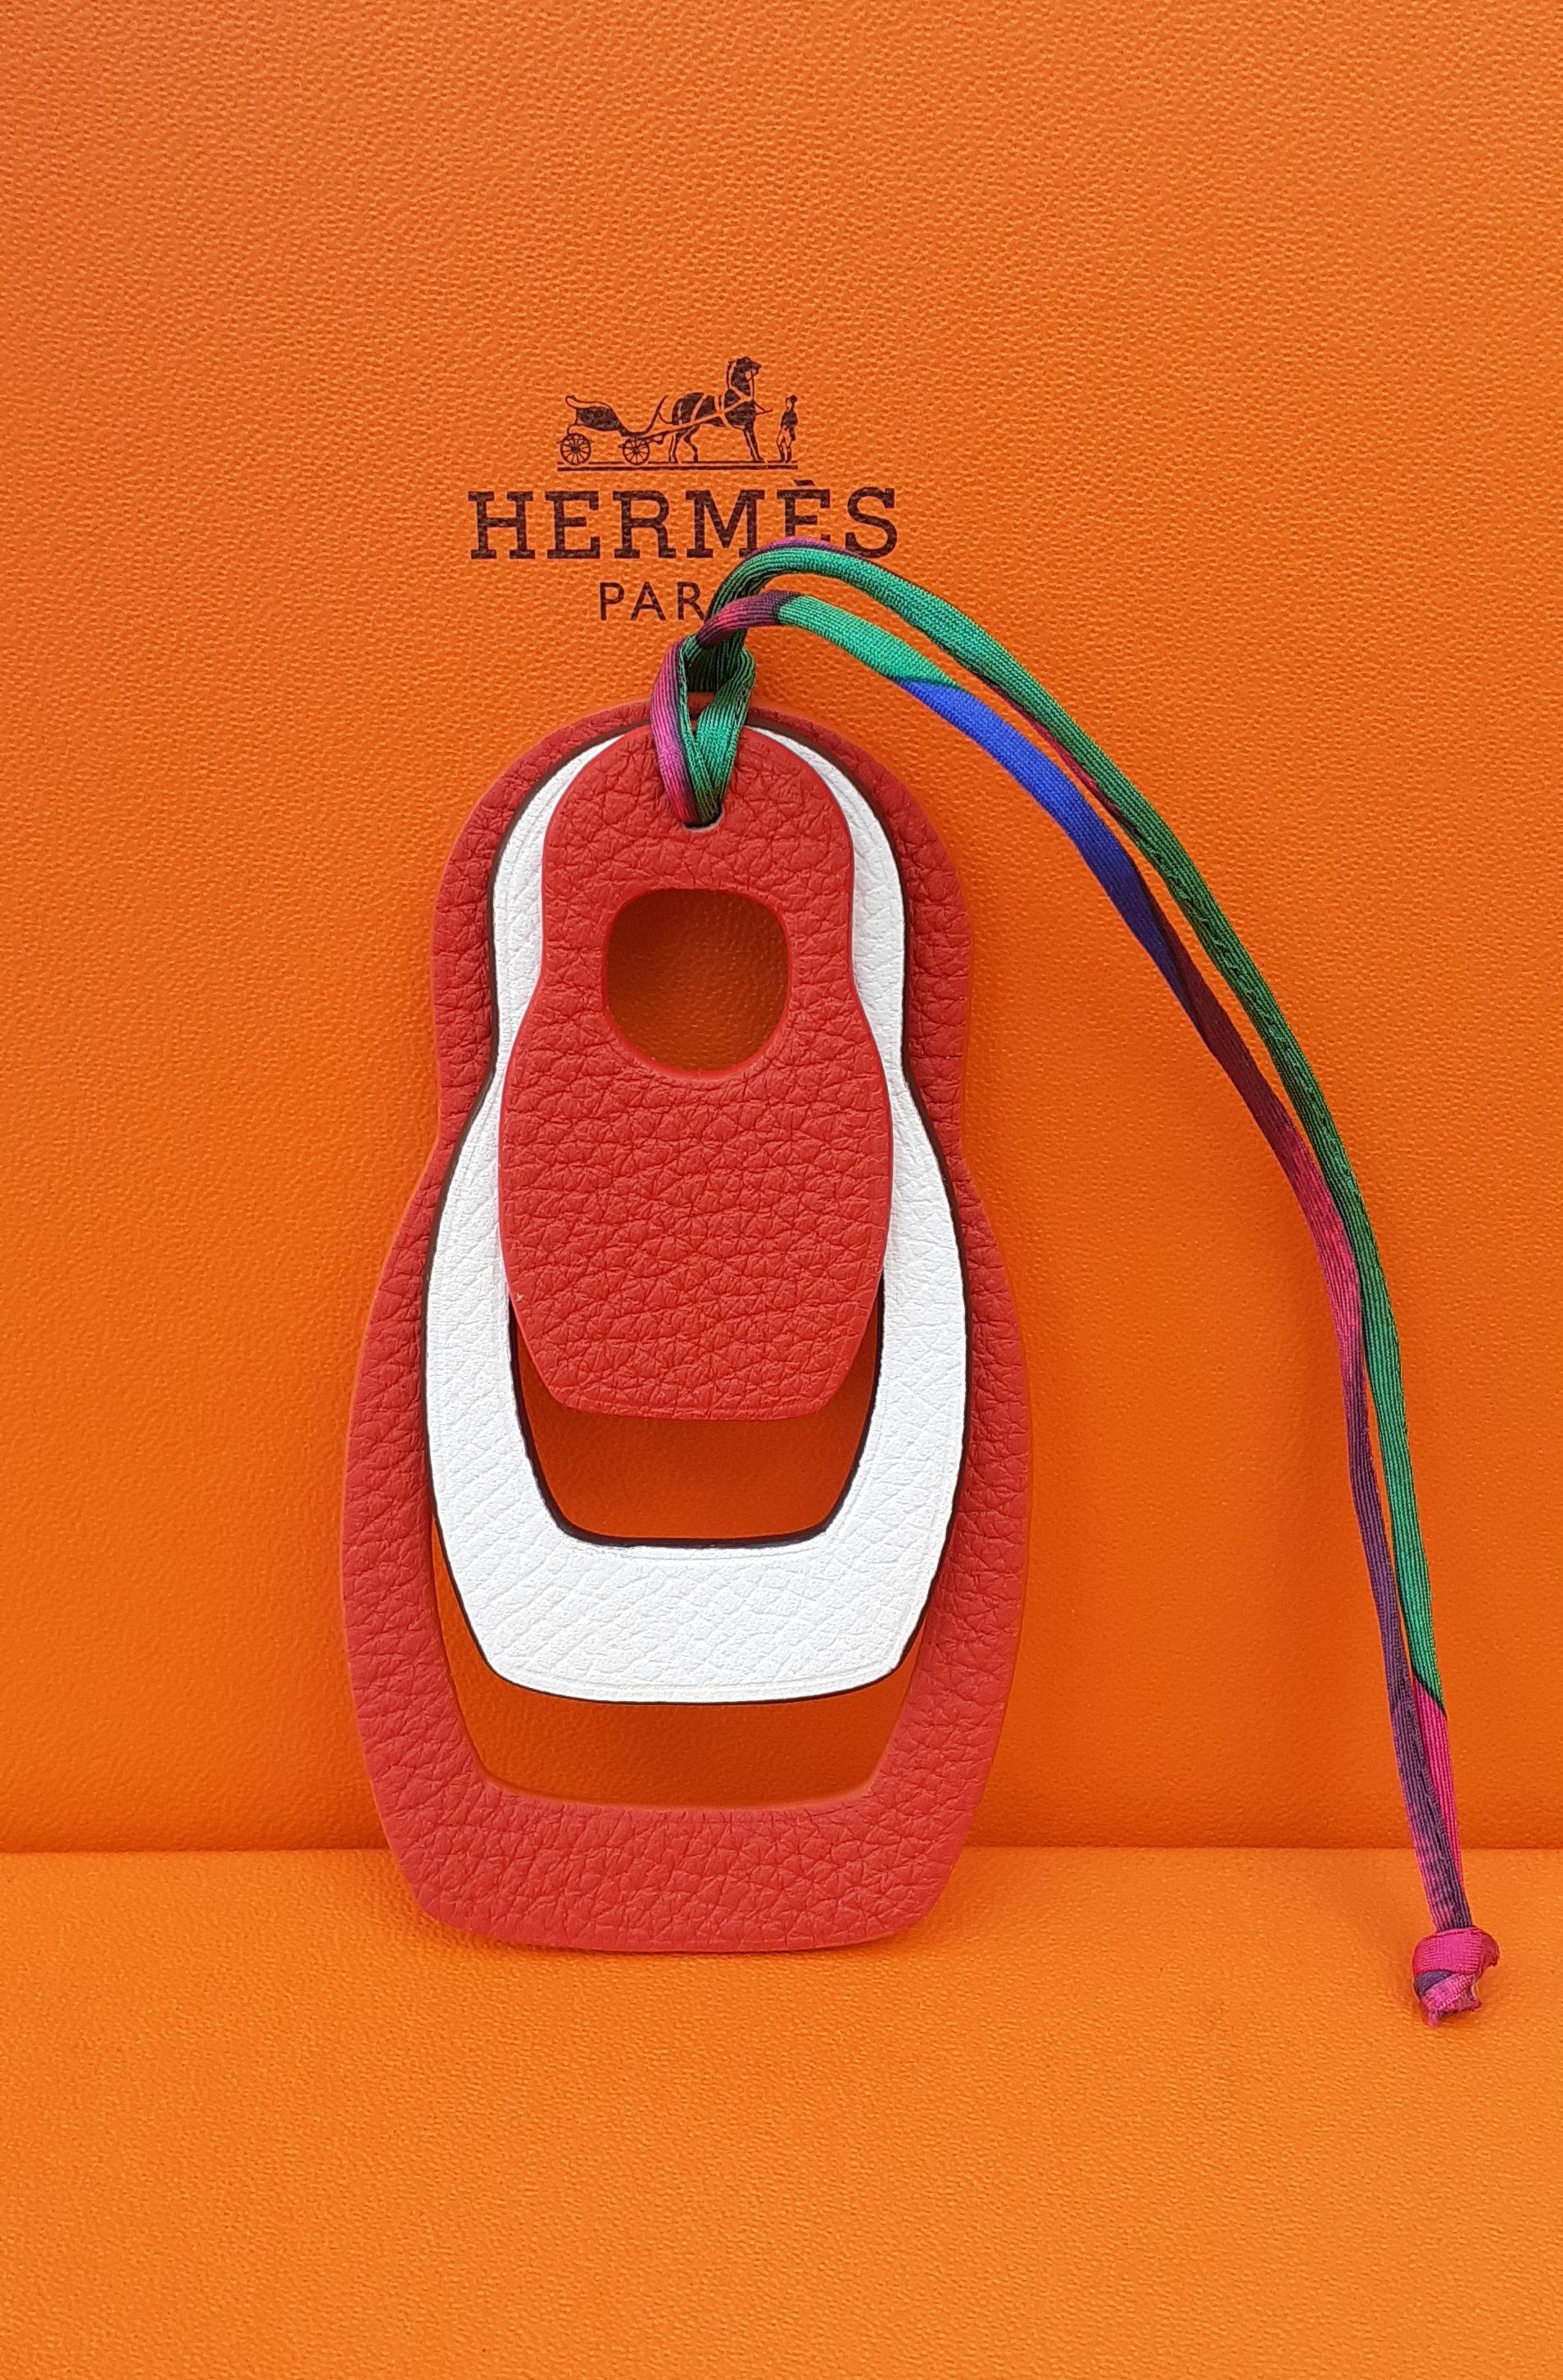 Rare Authentic Hermès Charm

In the shape of Russian dolls, called matryoshkas in russian

3 Russian dolls of different sizes connected by a silk link

The link can be removed and each doll used separately

Made in France

No date stamp

From Hermès